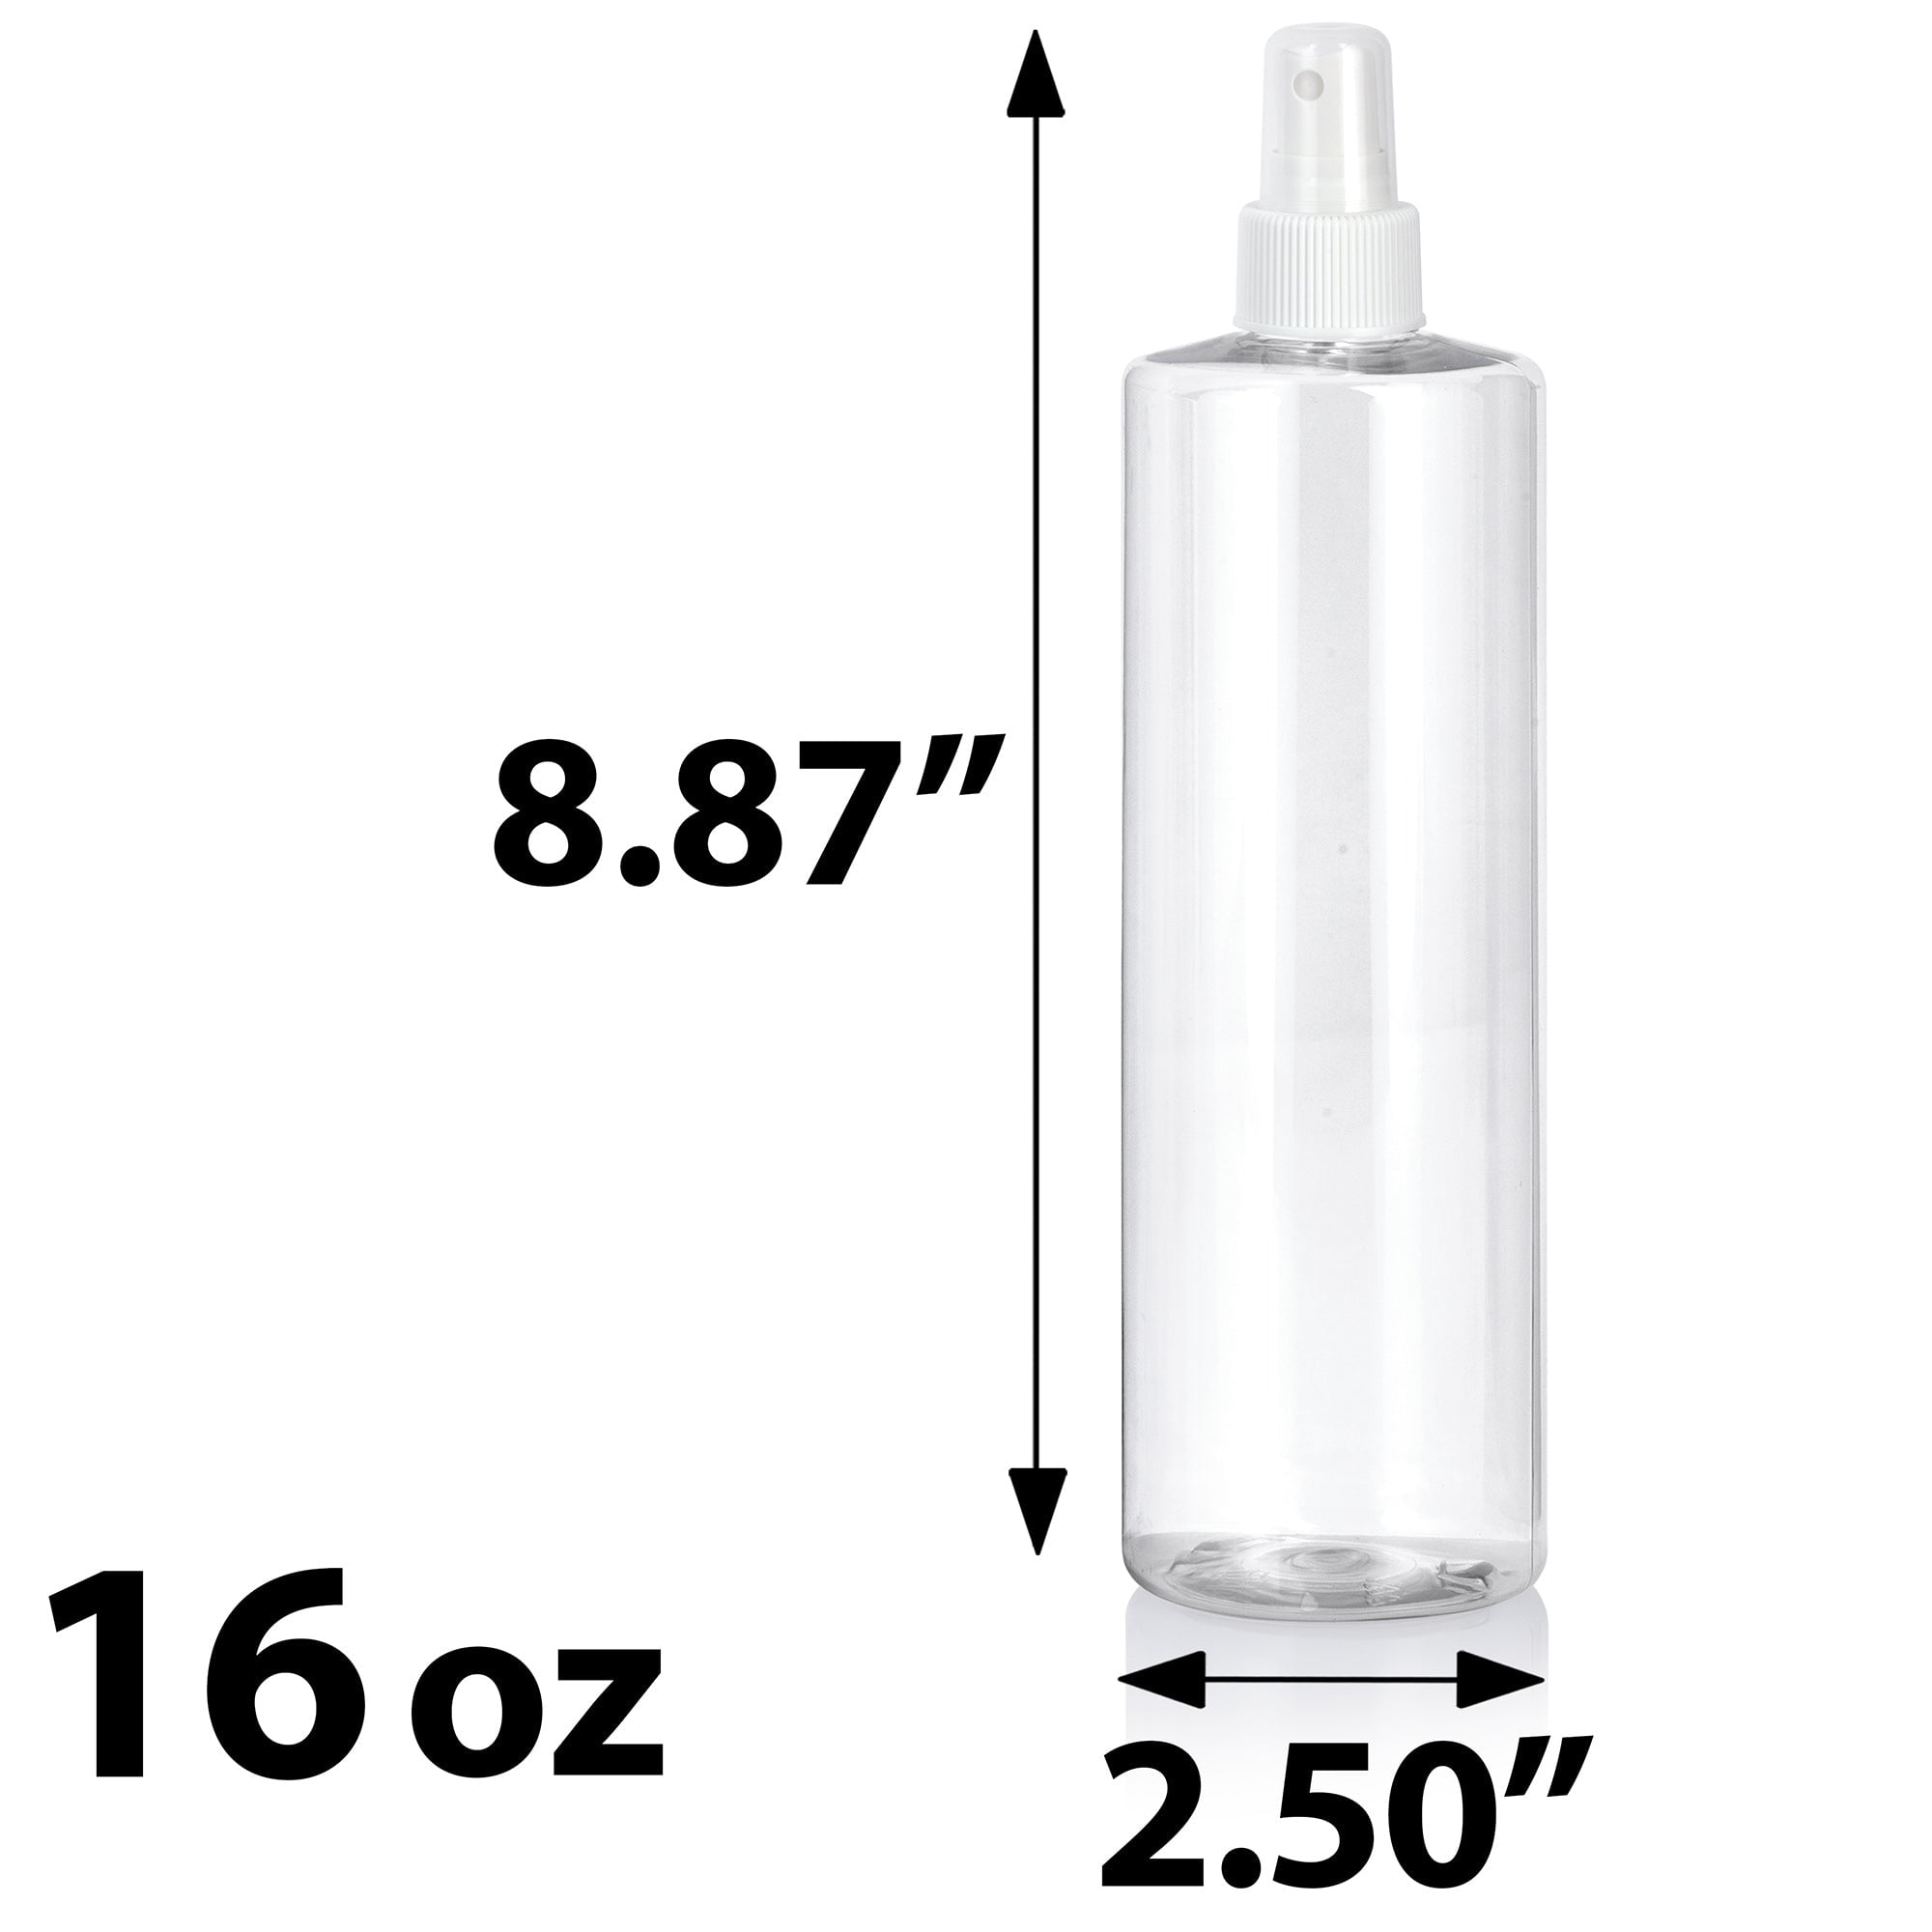 8 oz / 250 ml Clear PET (BPA Free) Plastic Oblong Flask Style Refillable  Bottle with White Caps (8 pack)